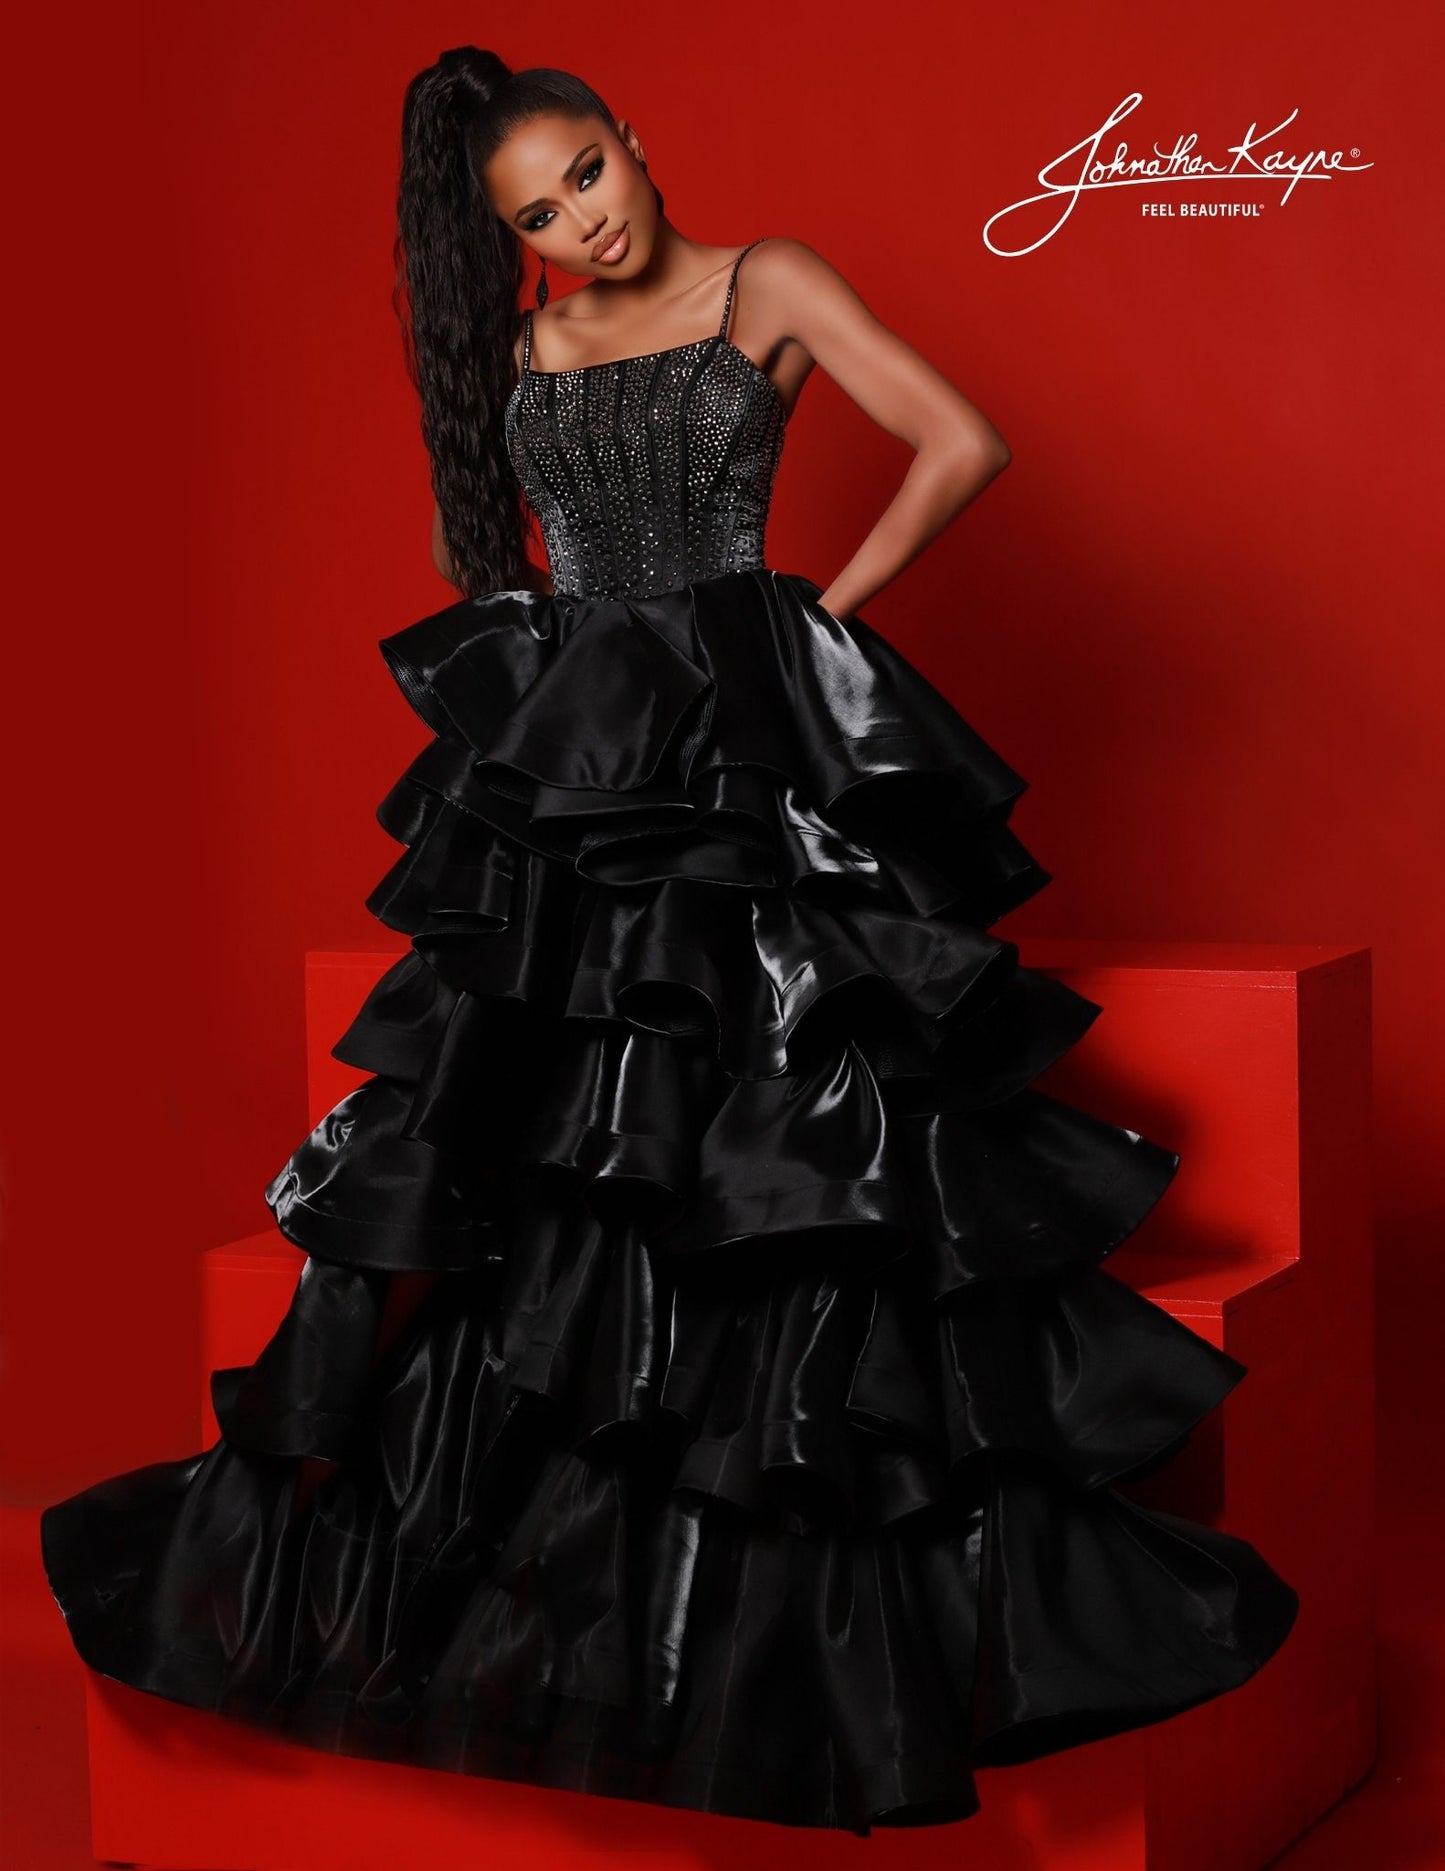 Johnathan Kayne 2721 This tiered ruffle high low skirt in this gown is a show stopper crystal stone corset front bodice is absolutely stunning made of shimmer satin to give a little shine  Sizes: 00,0,2,4,6,8,10,12,14,16  Colors: Black, Red